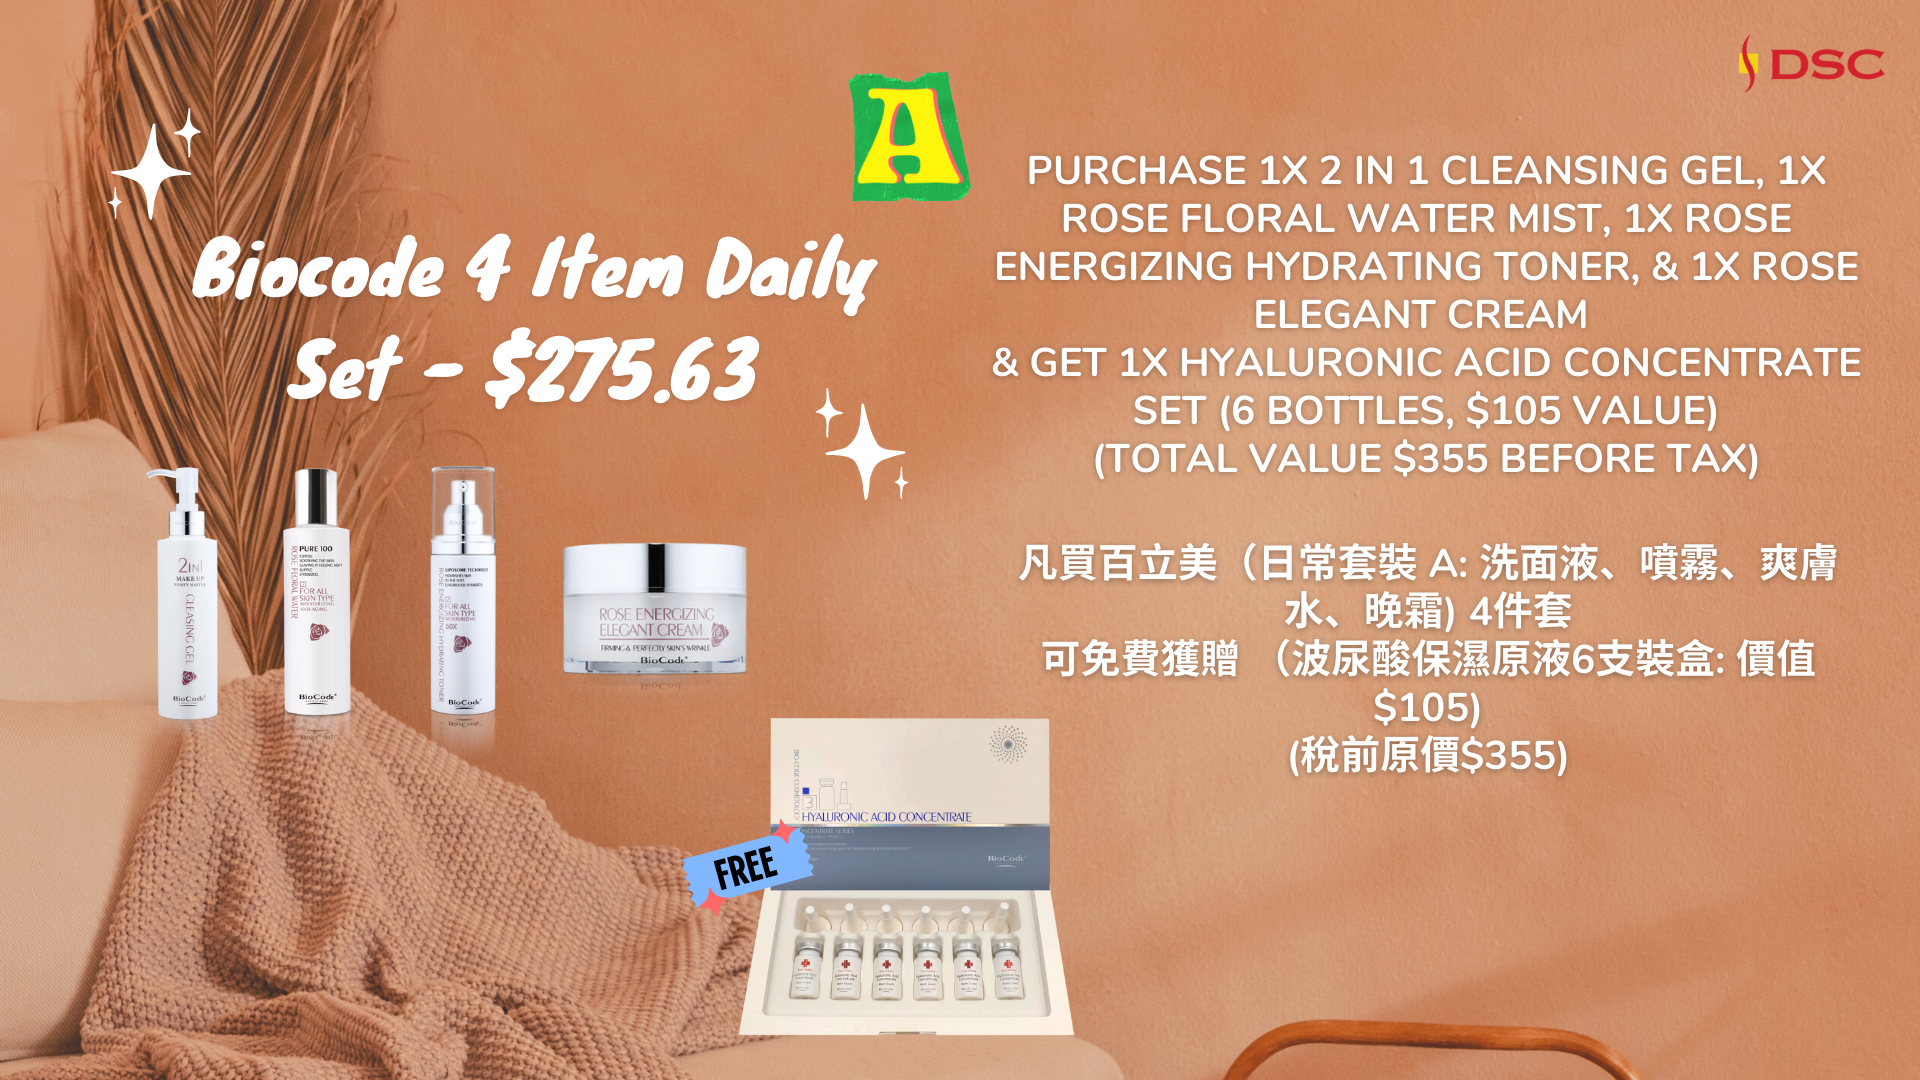 BioCode Skincare DSC 11/11 & Black Friday Promotion with images of cleanser, toner, rose mist, rose cream, and 6 ampoule hyaluronic acid serum set as gwp of 4 item BioCode Daily Use Set against terracotta color background